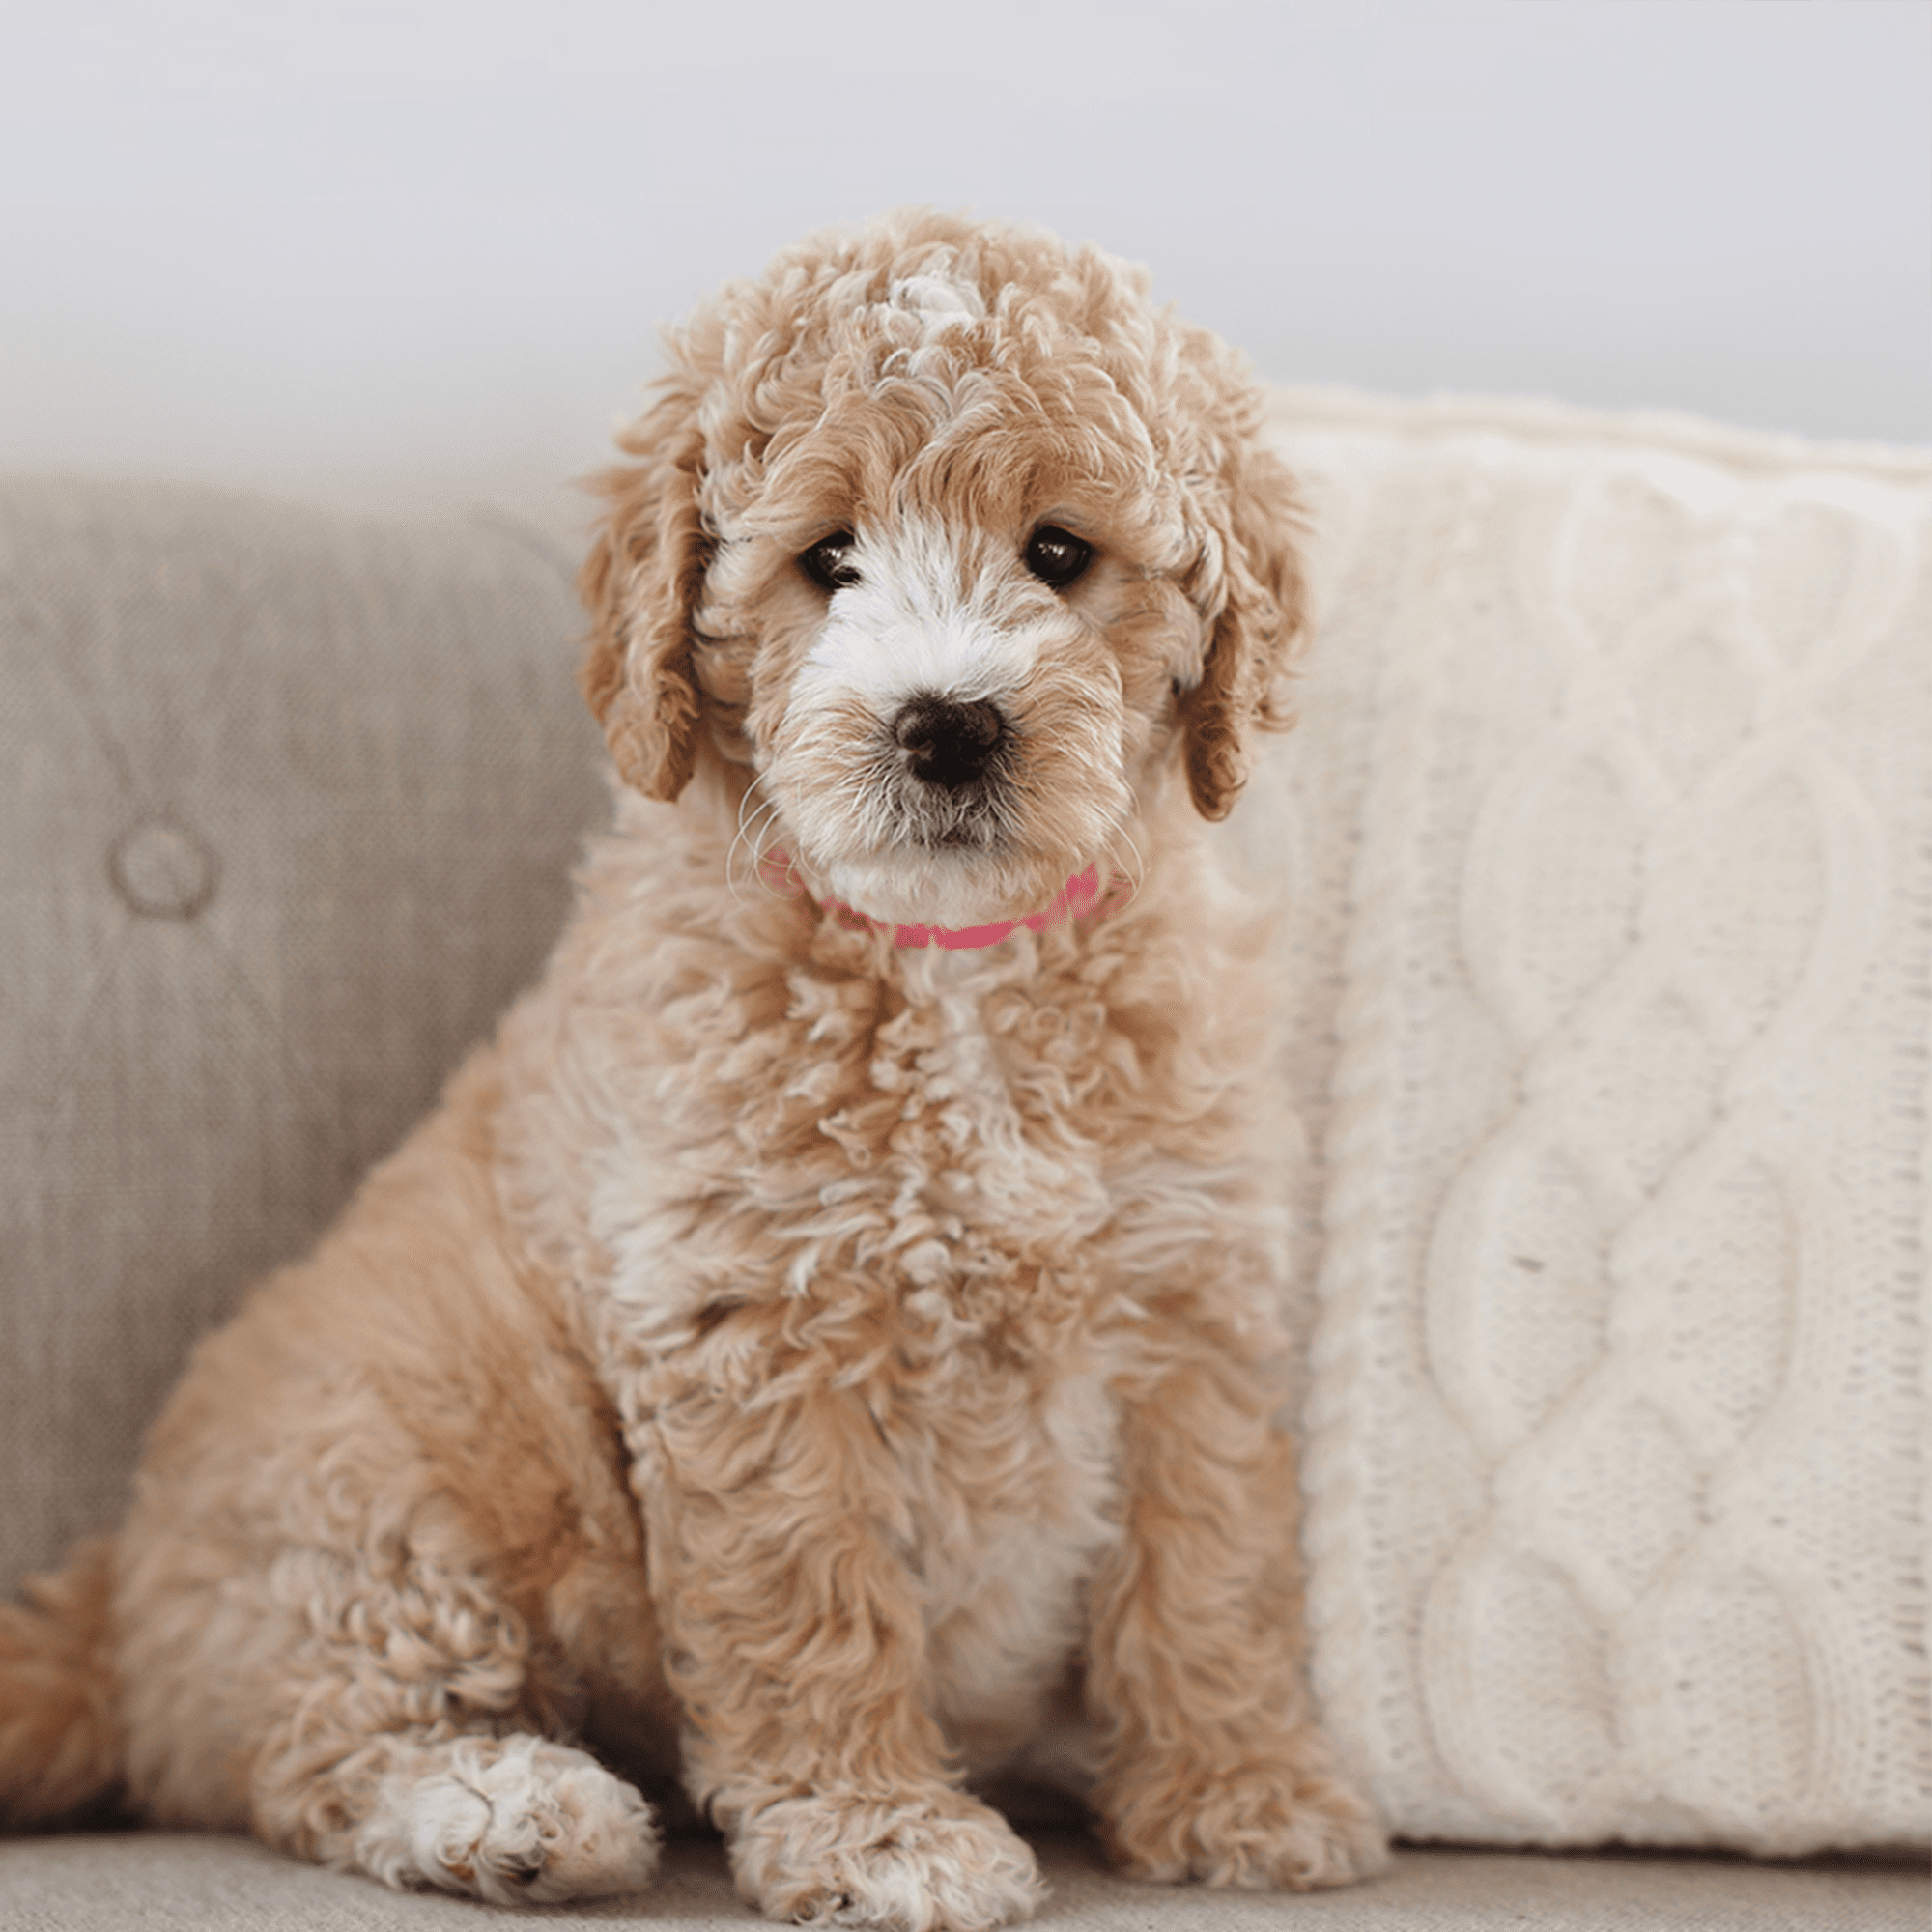 Tan and white F1B goldendoodle puppy